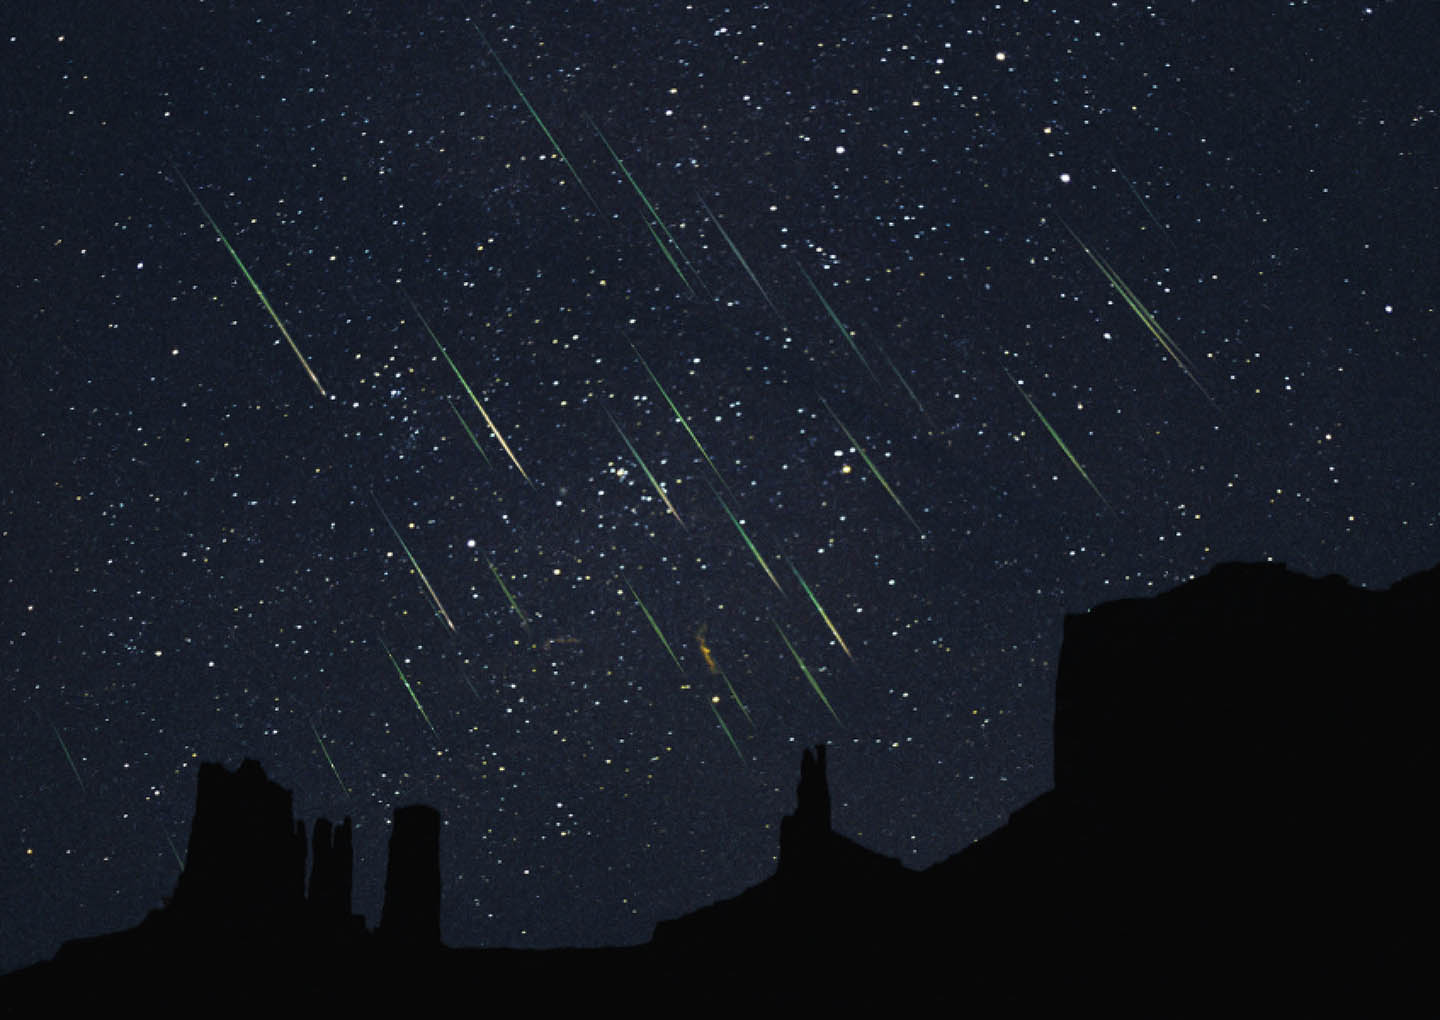 Watch the spectacular Leonid meteor shower live online tonight! Pee